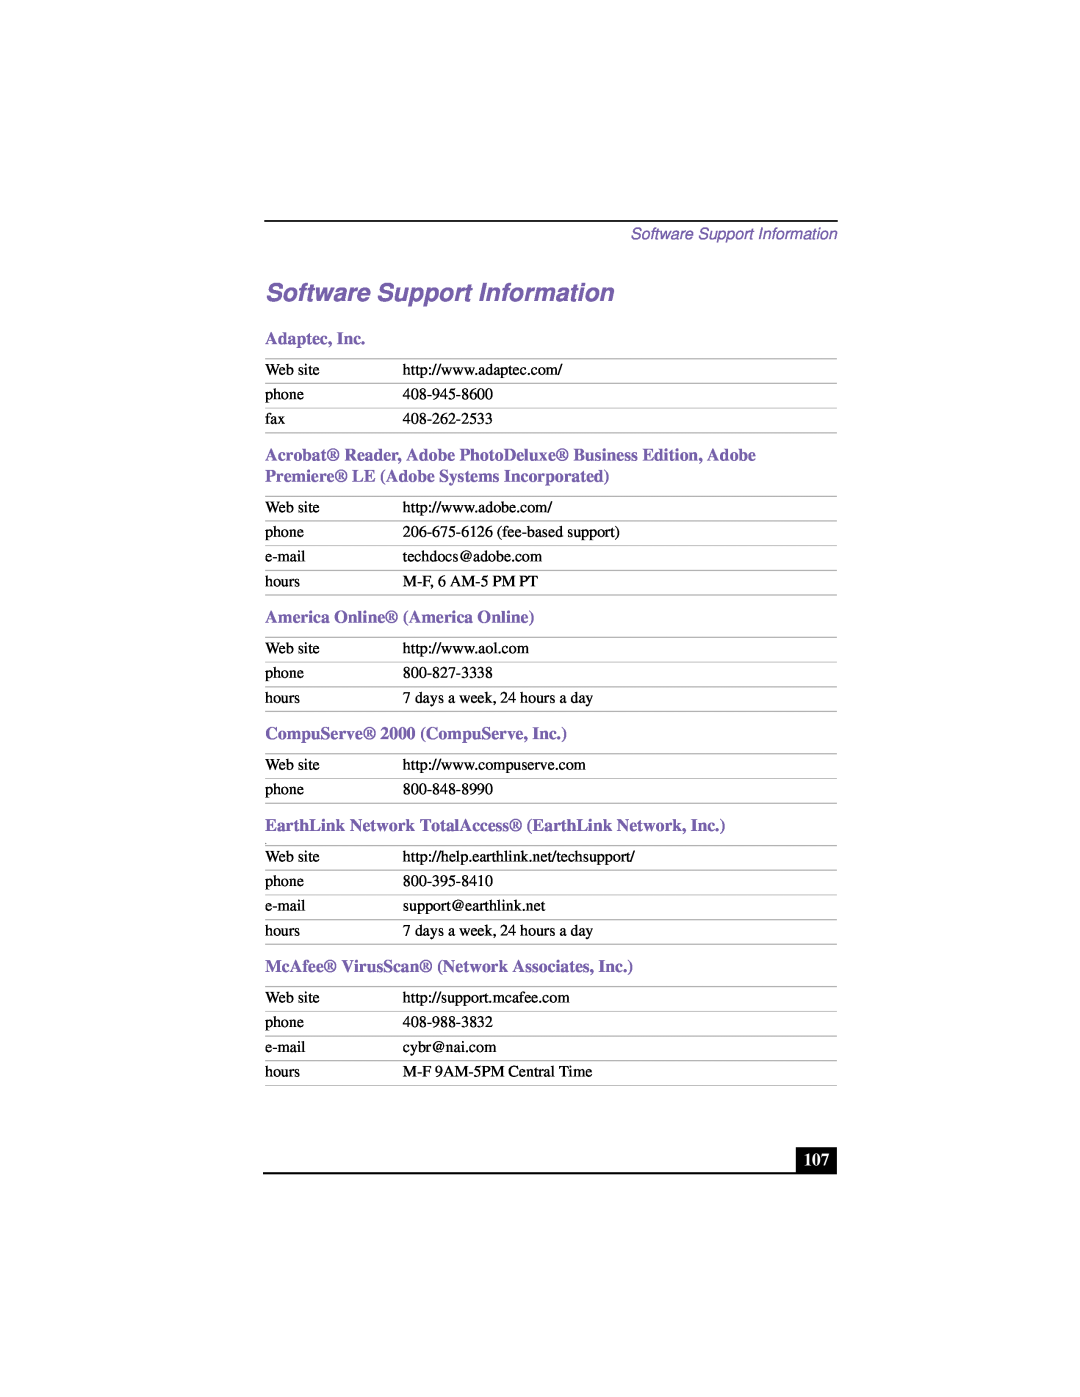 Sony PCG-FX120 manual Software Support Information, Adaptec, Inc, Acrobat Reader, Adobe PhotoDeluxe Business Edition, Adobe 